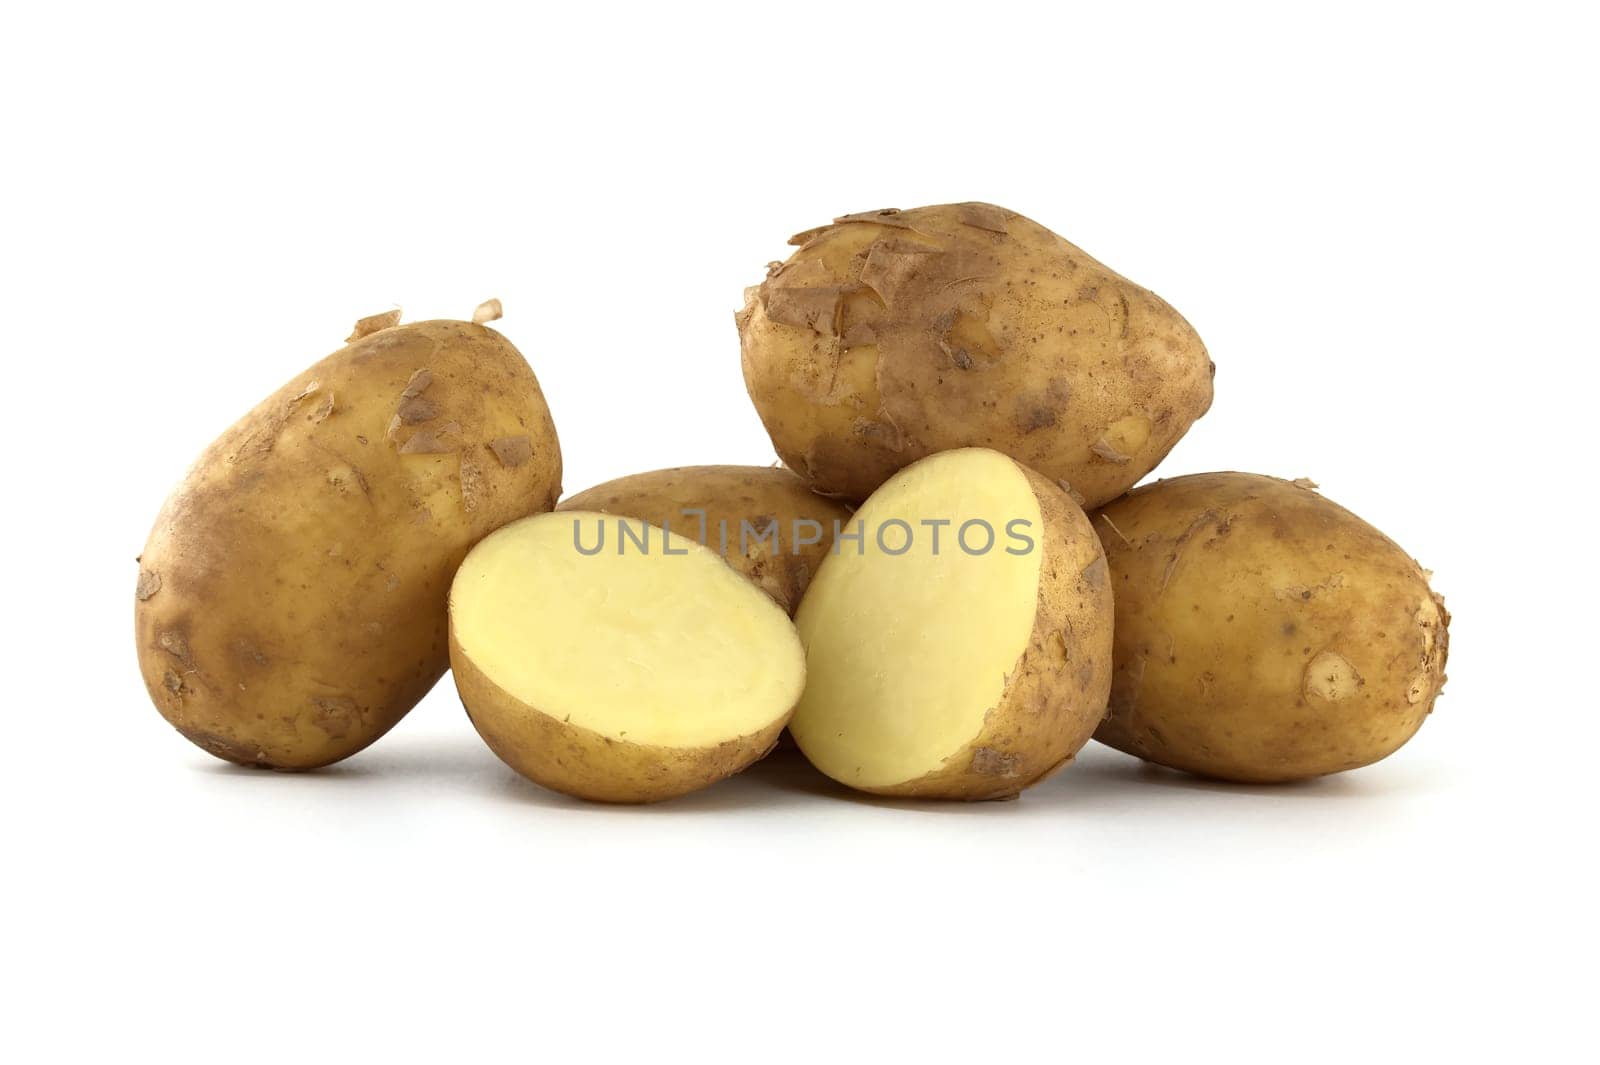 Group of fresh early potatoes, with a light brown skin and dark brown spots isolated on a white background, one potato bisected displaying its yellow interior